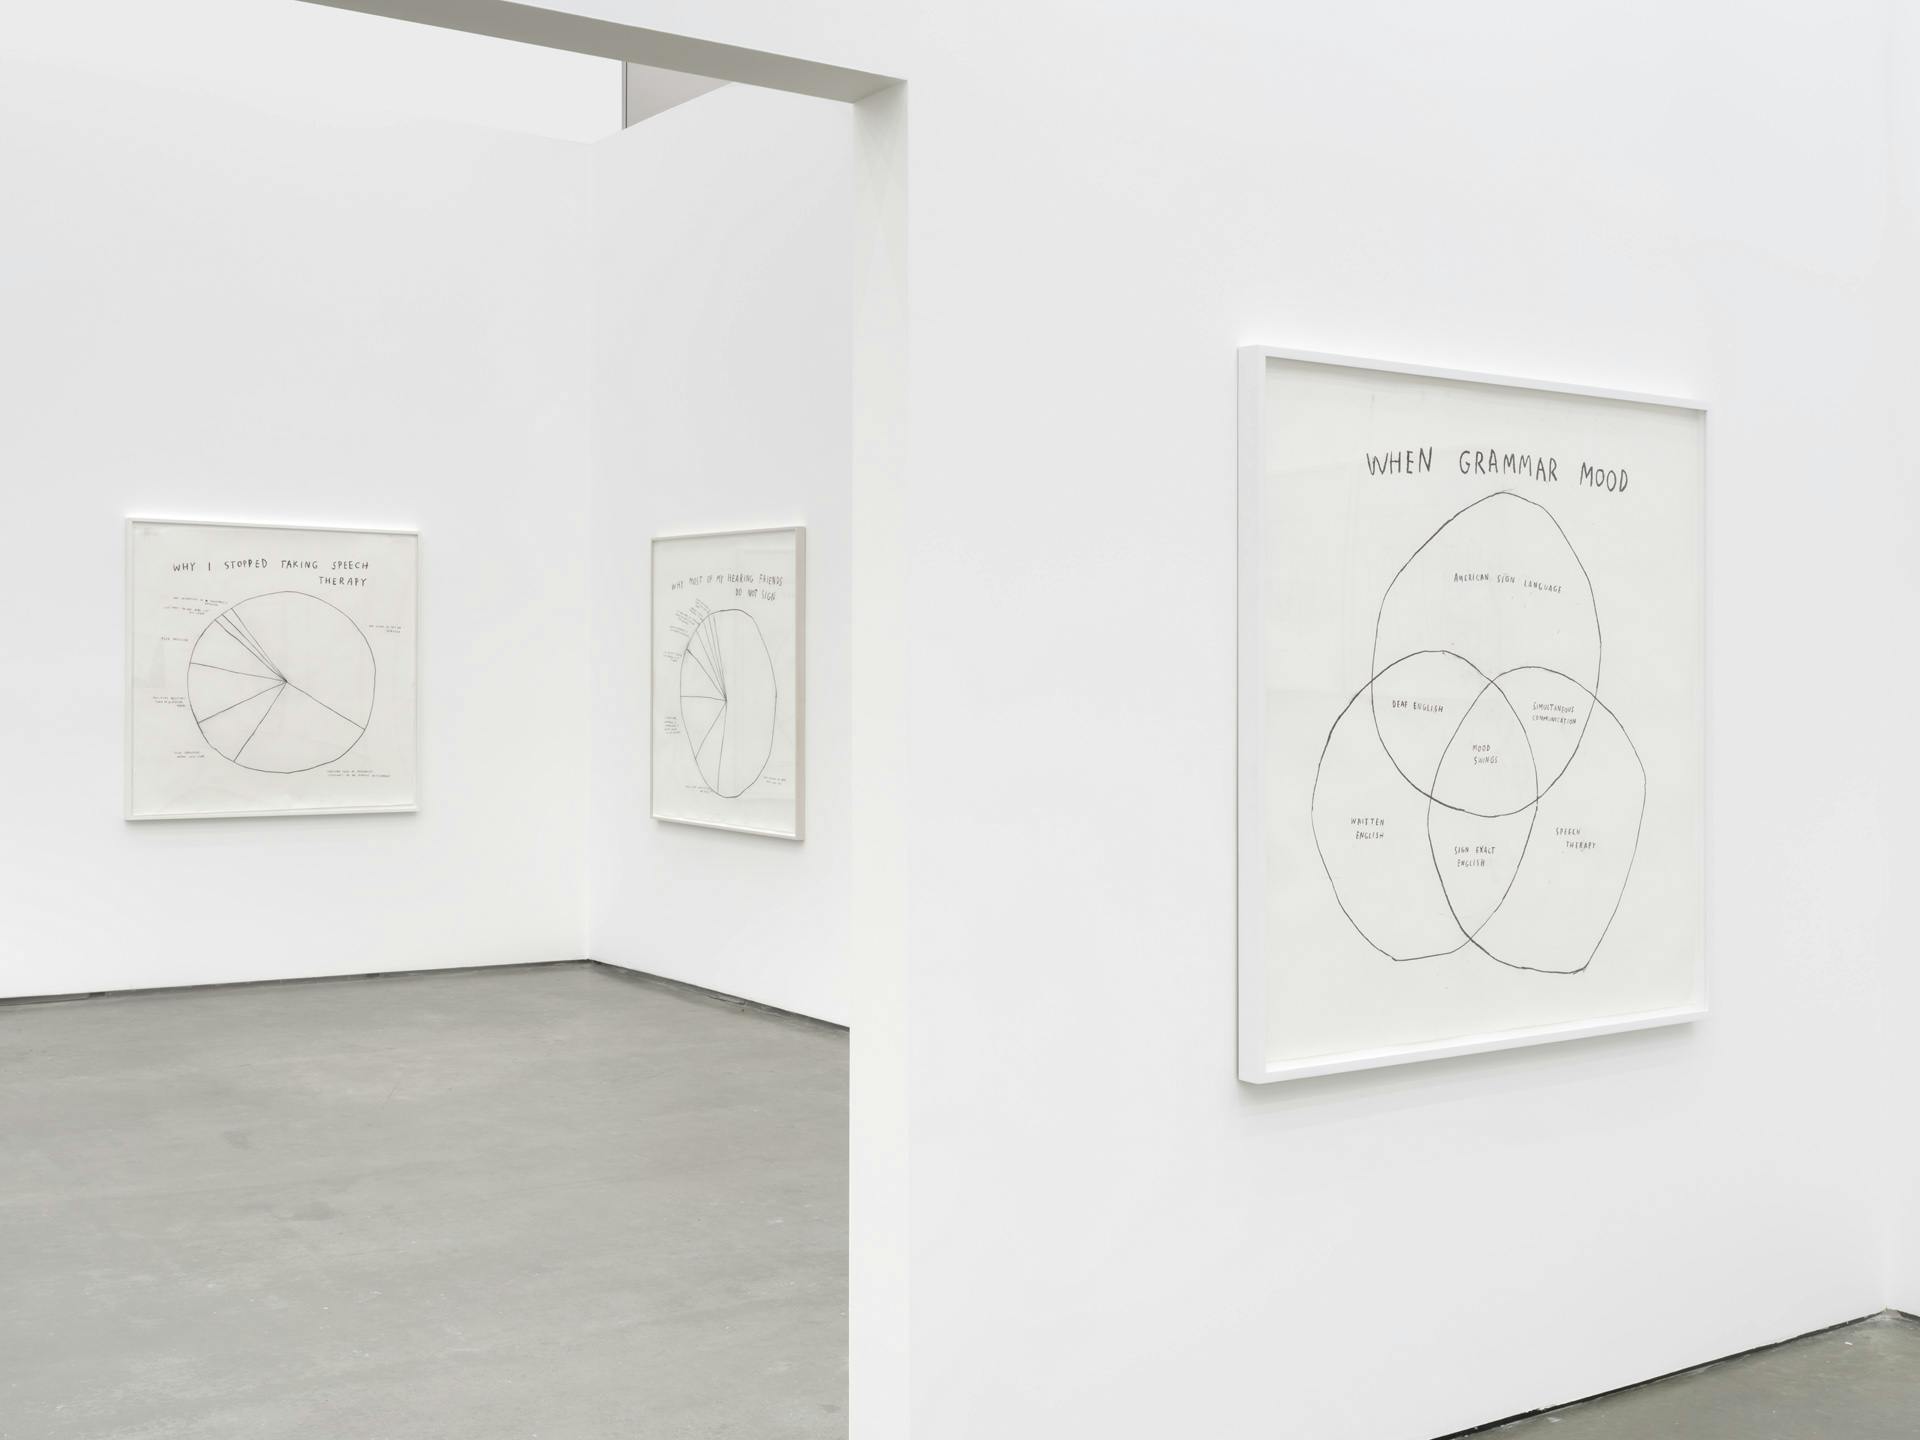 Three drawings by Christine Sun Kim, variously depicting pie charts and venn diagrams. The drawing in the foreground features the words "when grammar mood."